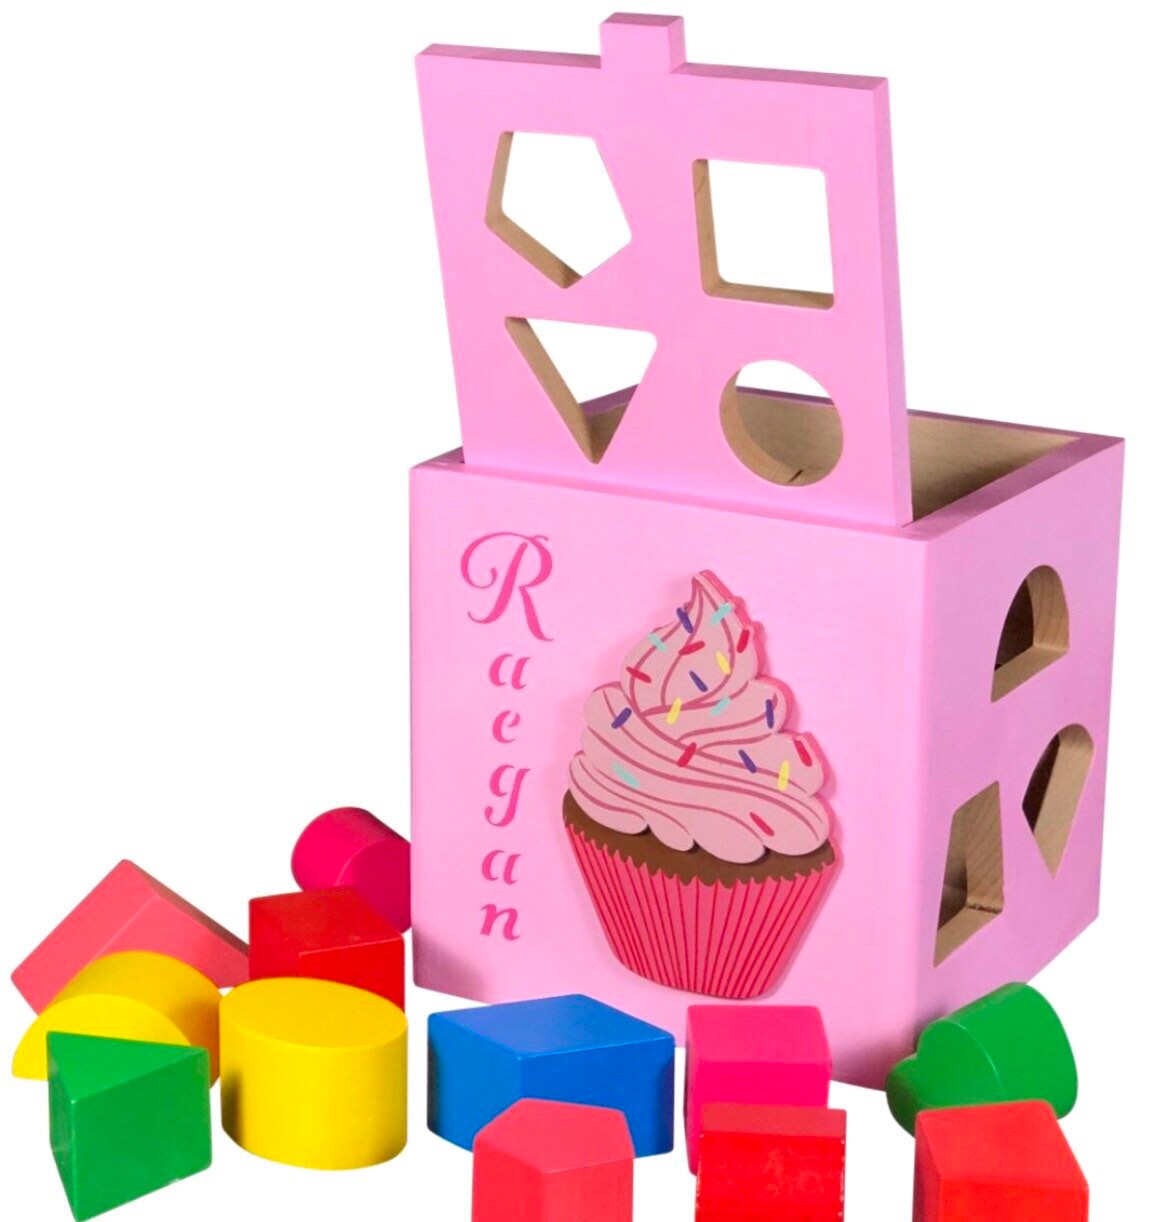 Fawn baby toys / pink shape sorting cube wooden toy